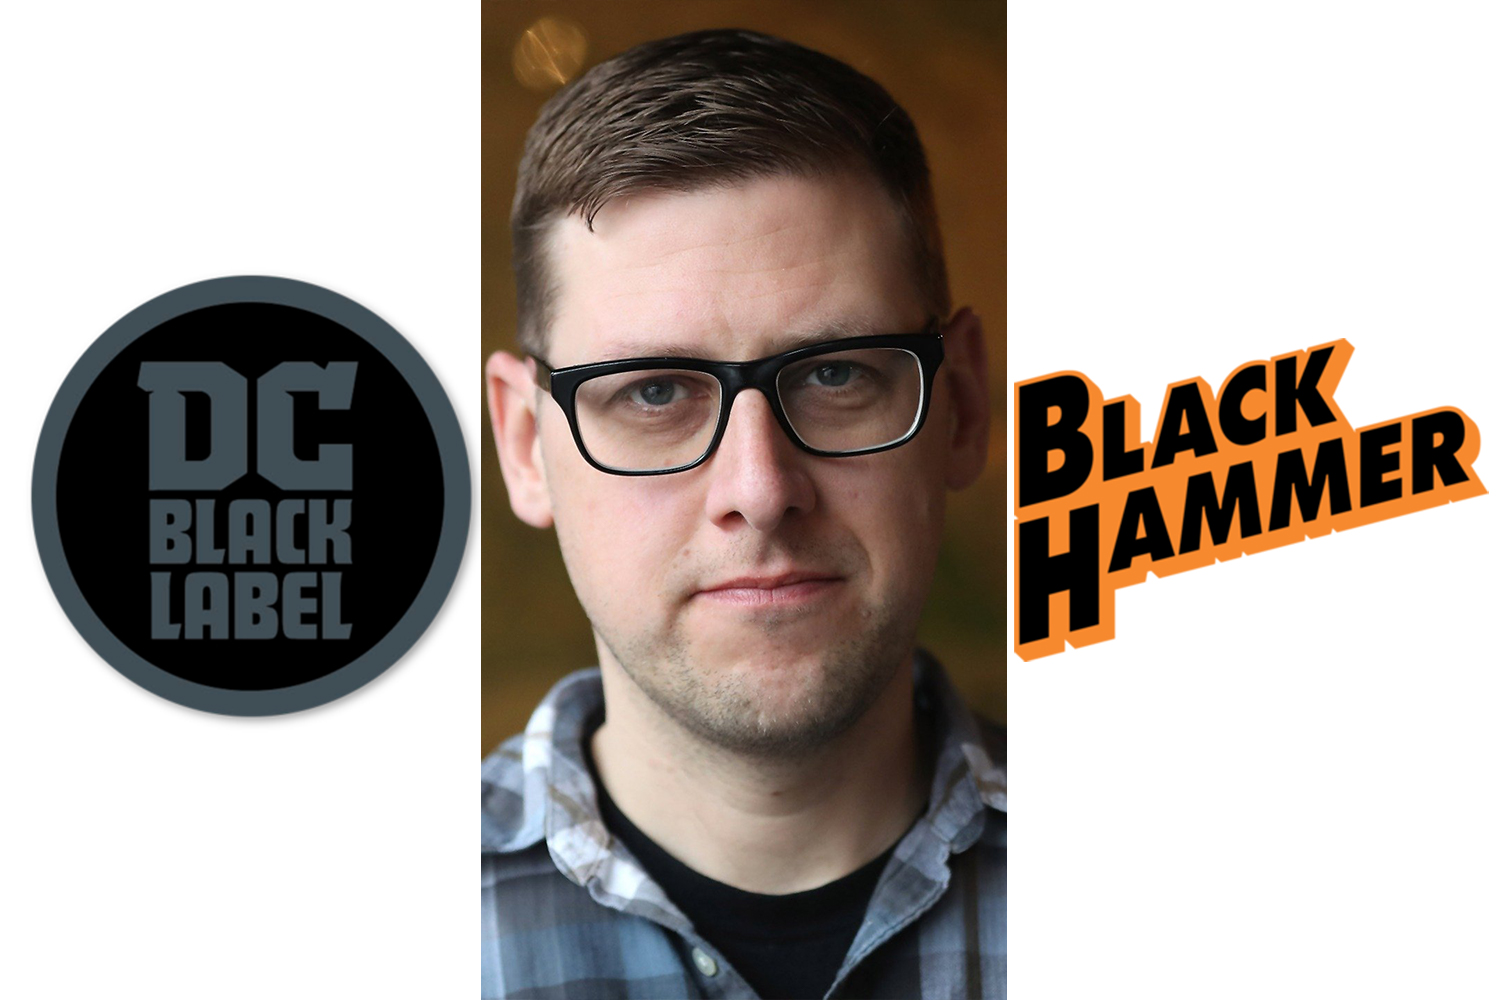 Jeff Lemire updates fans on two new DC Black Label titles and Black Hammer